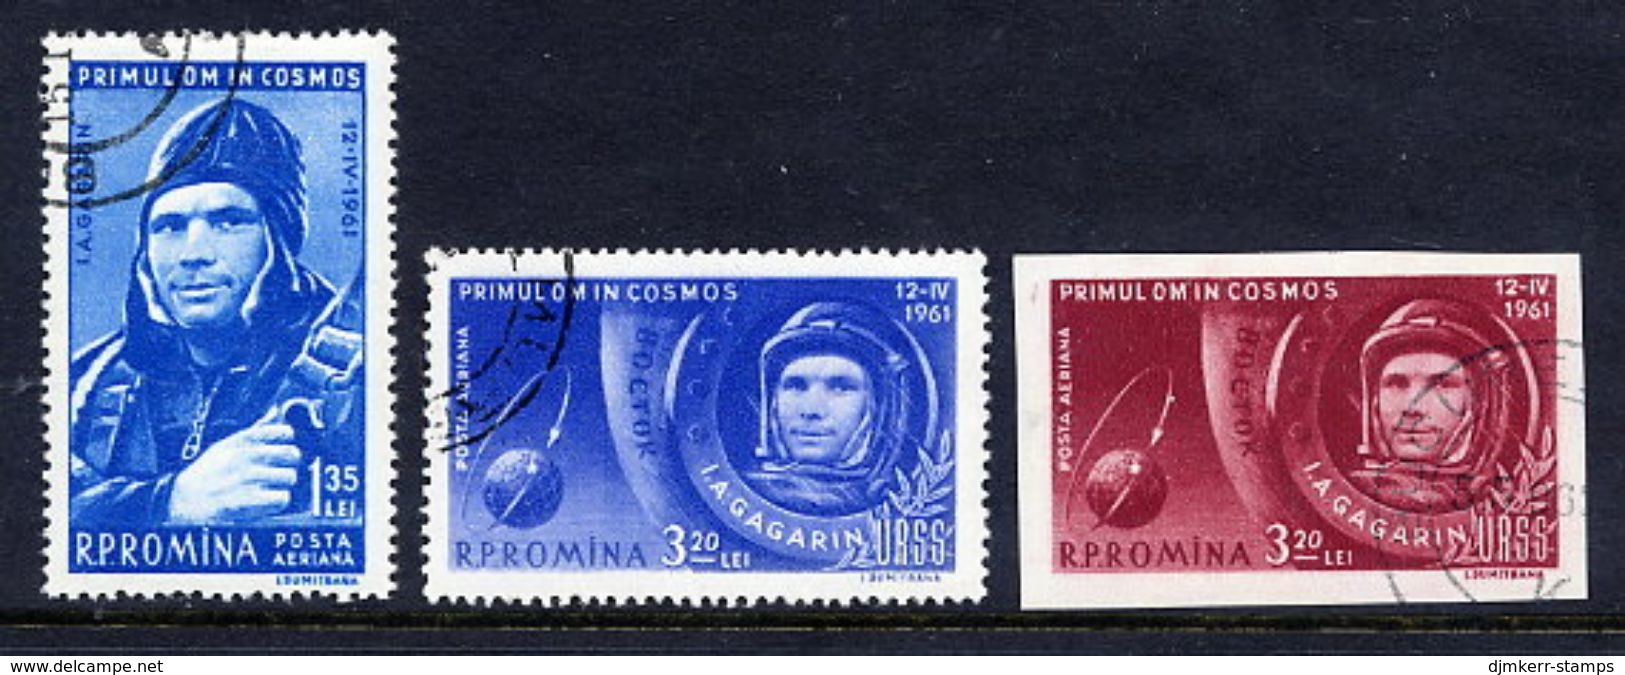 ROMANIA 1961 First Manned Space Flight  Used.  Michel 1962-64 - Usati